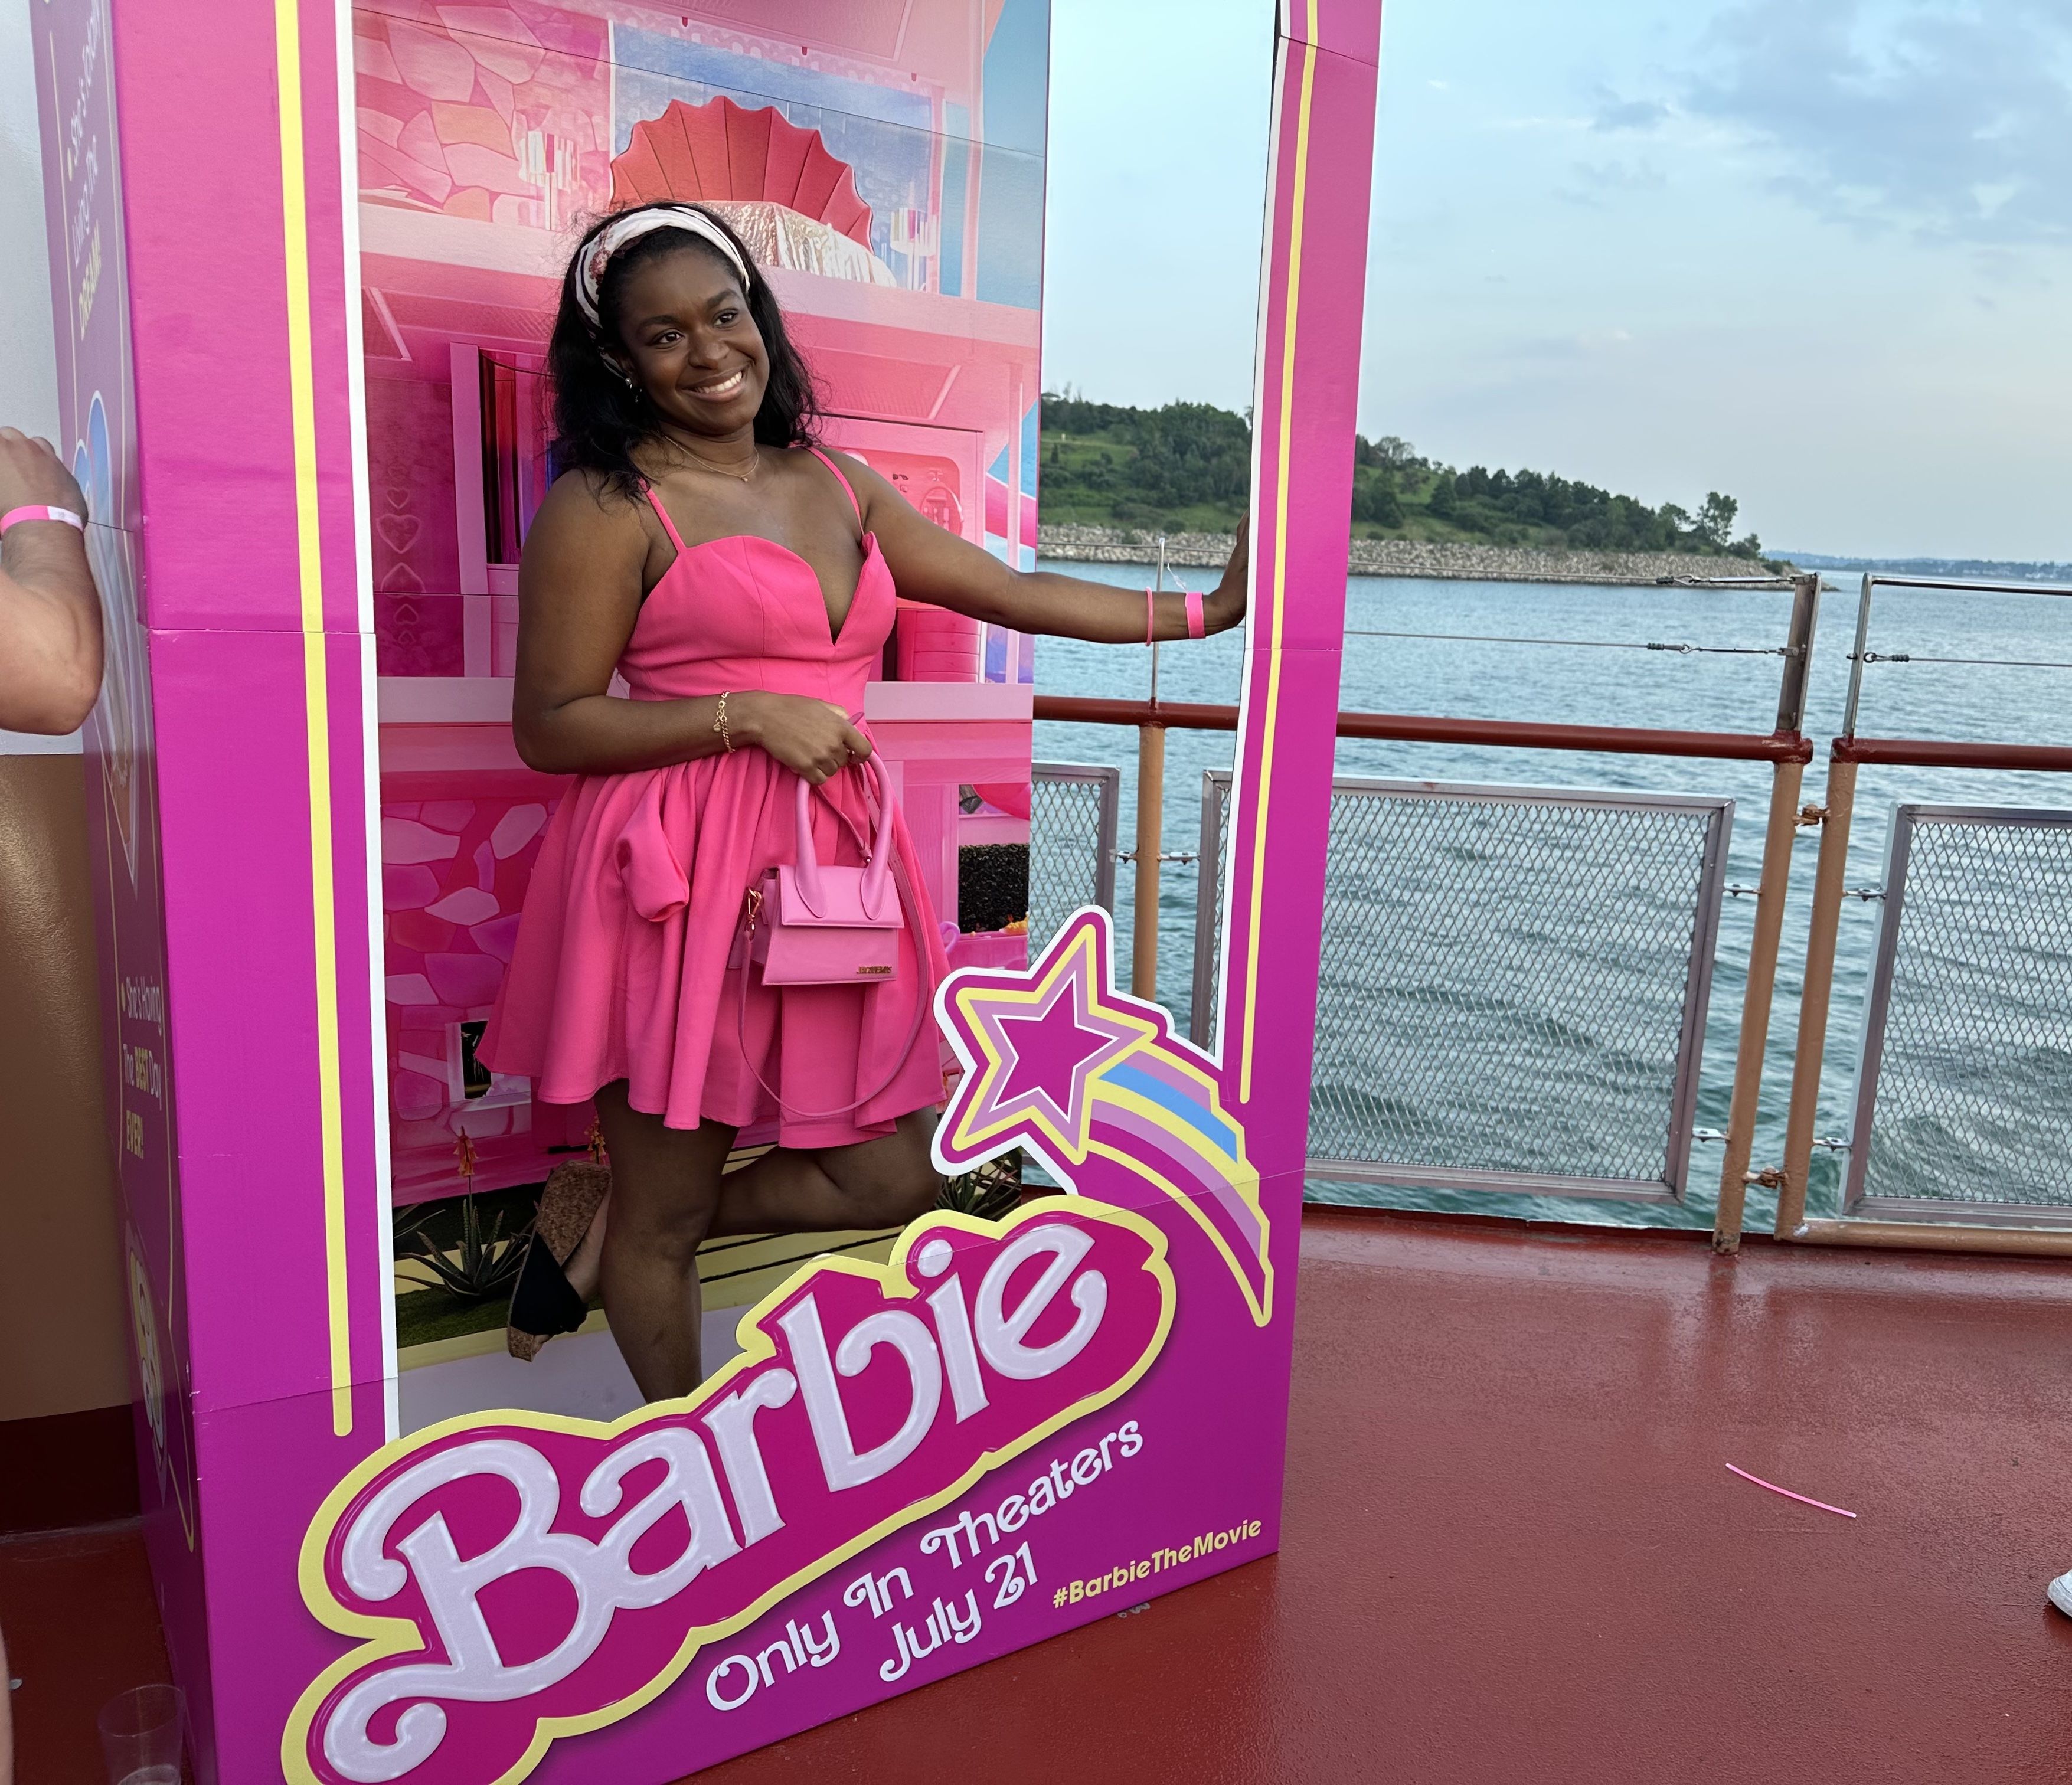 Jasmine Bacchus, a Black woman, poses for a photo inside the life-size Barbie box on the Barbie boat cruise. Jasmine wears a pink dress and small pink purse.